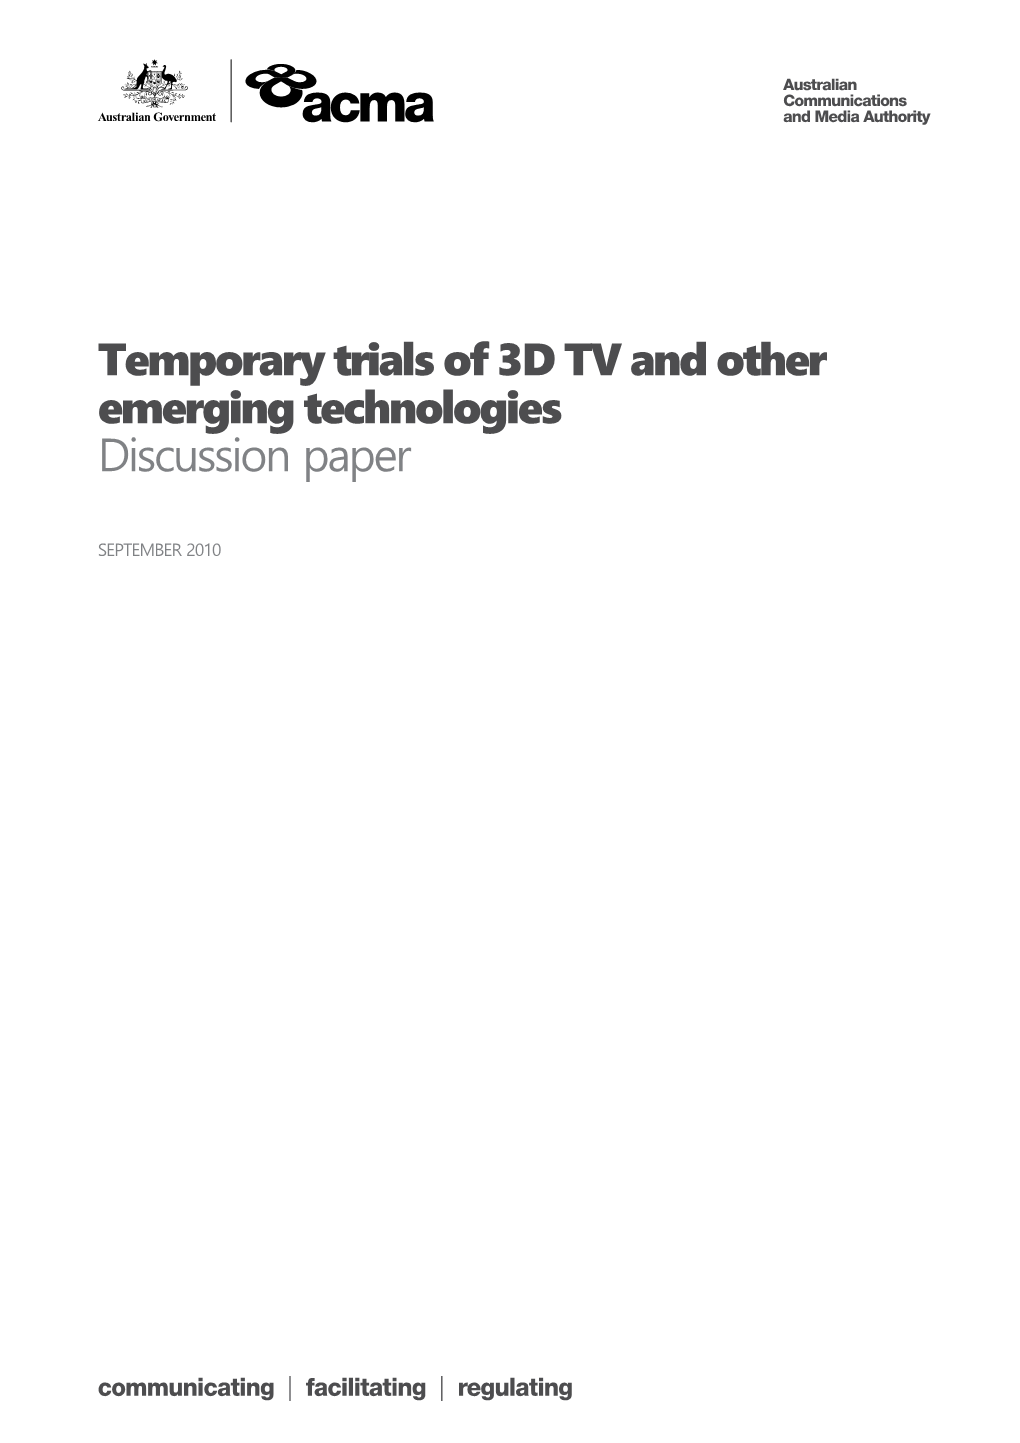 Temporary Trials of 3D TV and Other Emerging Technologies - Discussion Paper